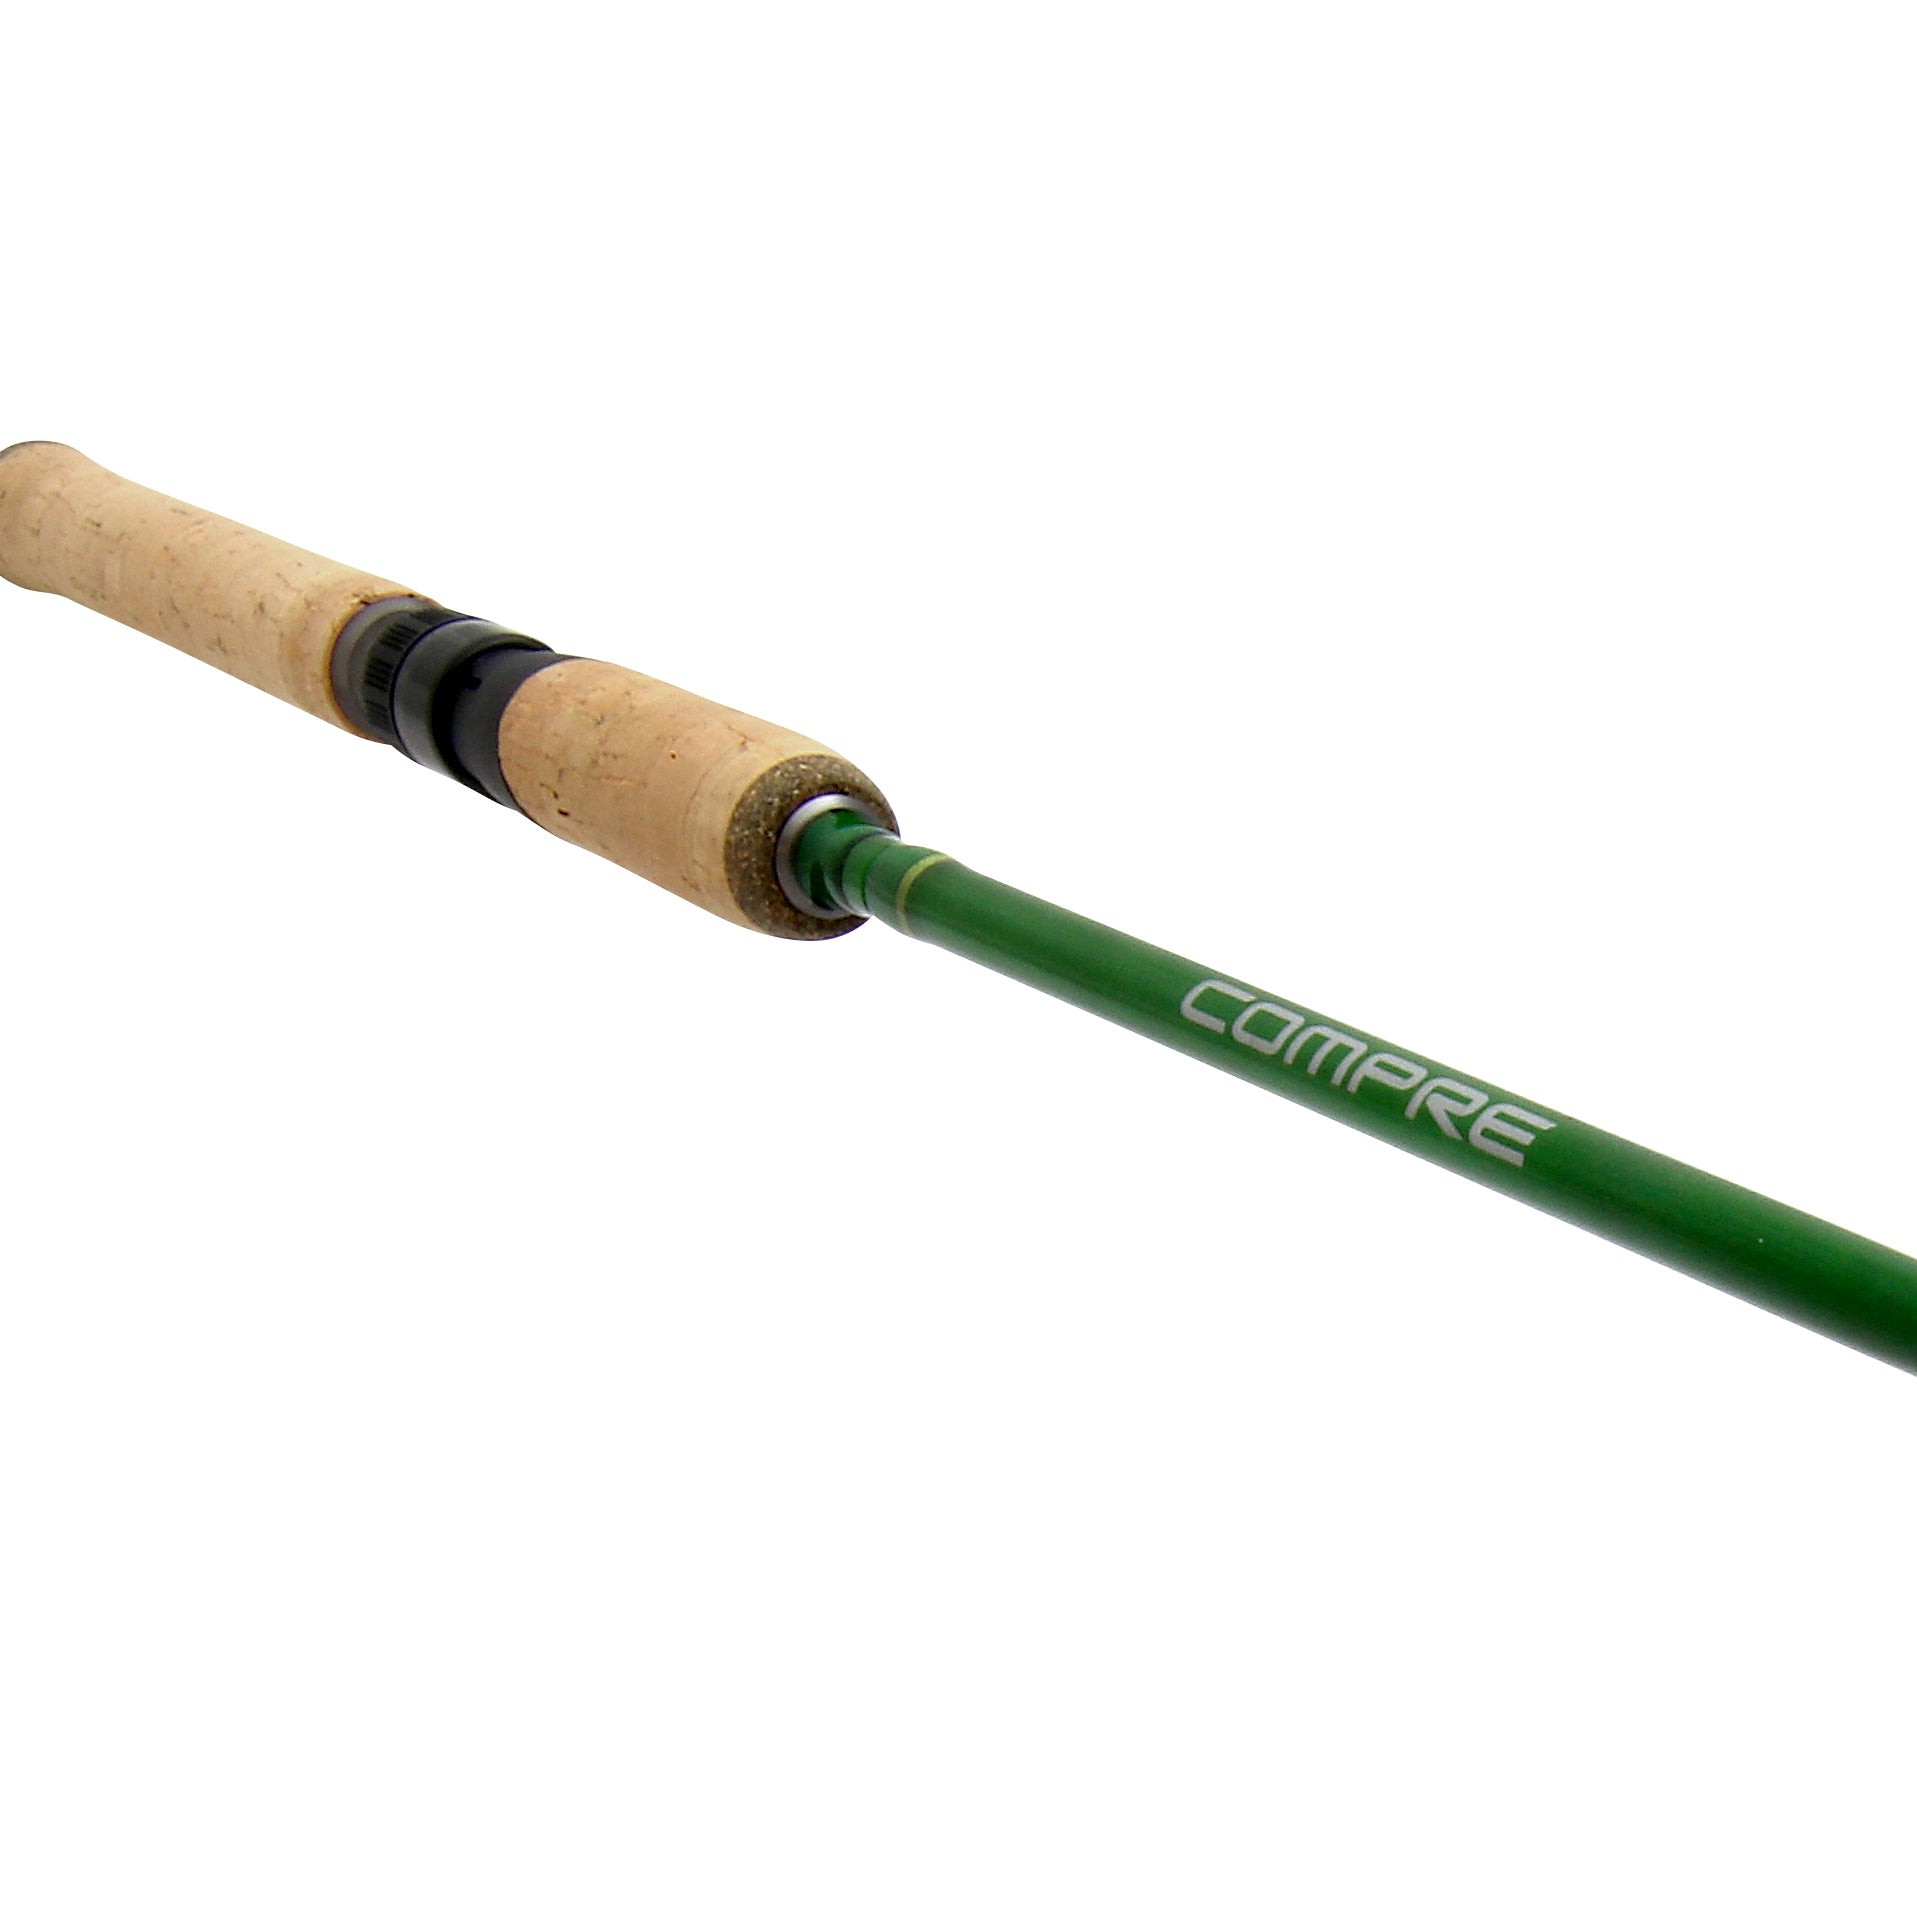 Shimano Compre Walleye D Spinning Rod CPSWX76MD